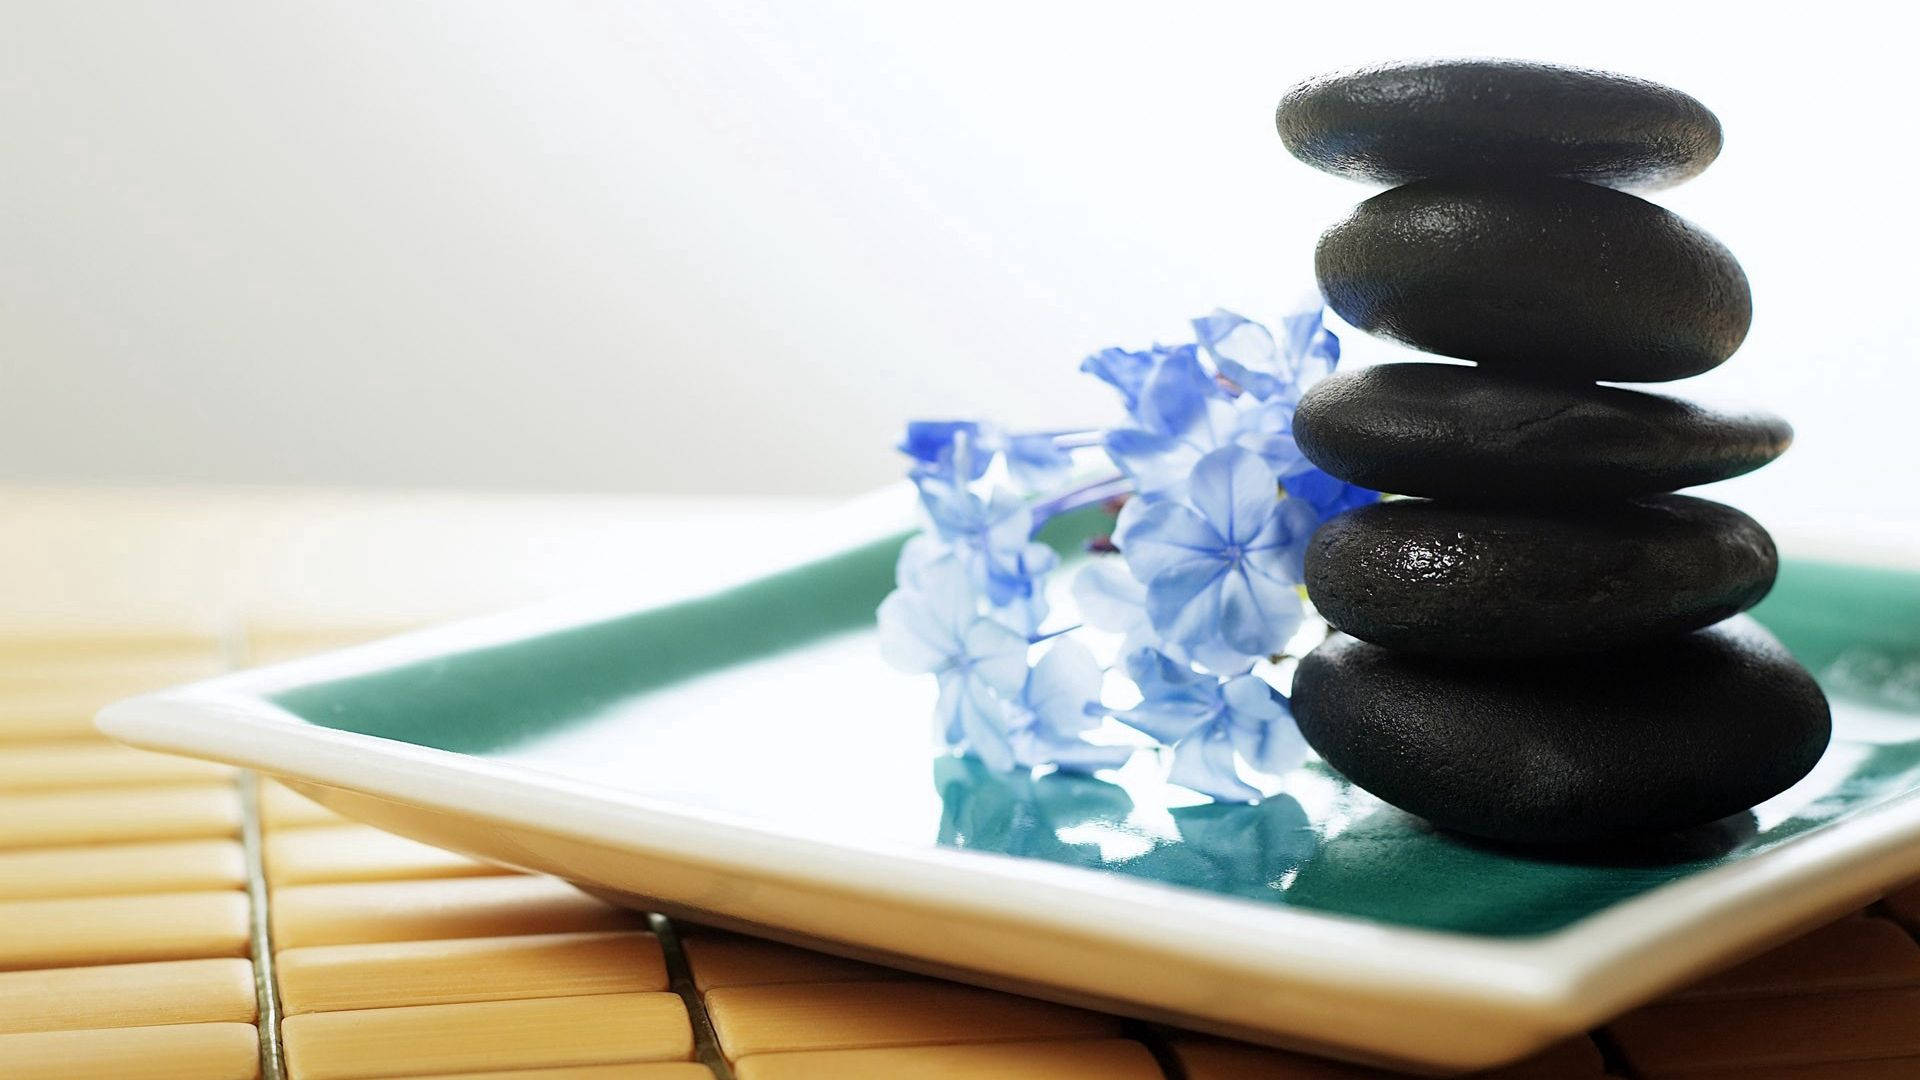 Black Balanced Zen Stones With Blue Flowers Therapy Wallpaper